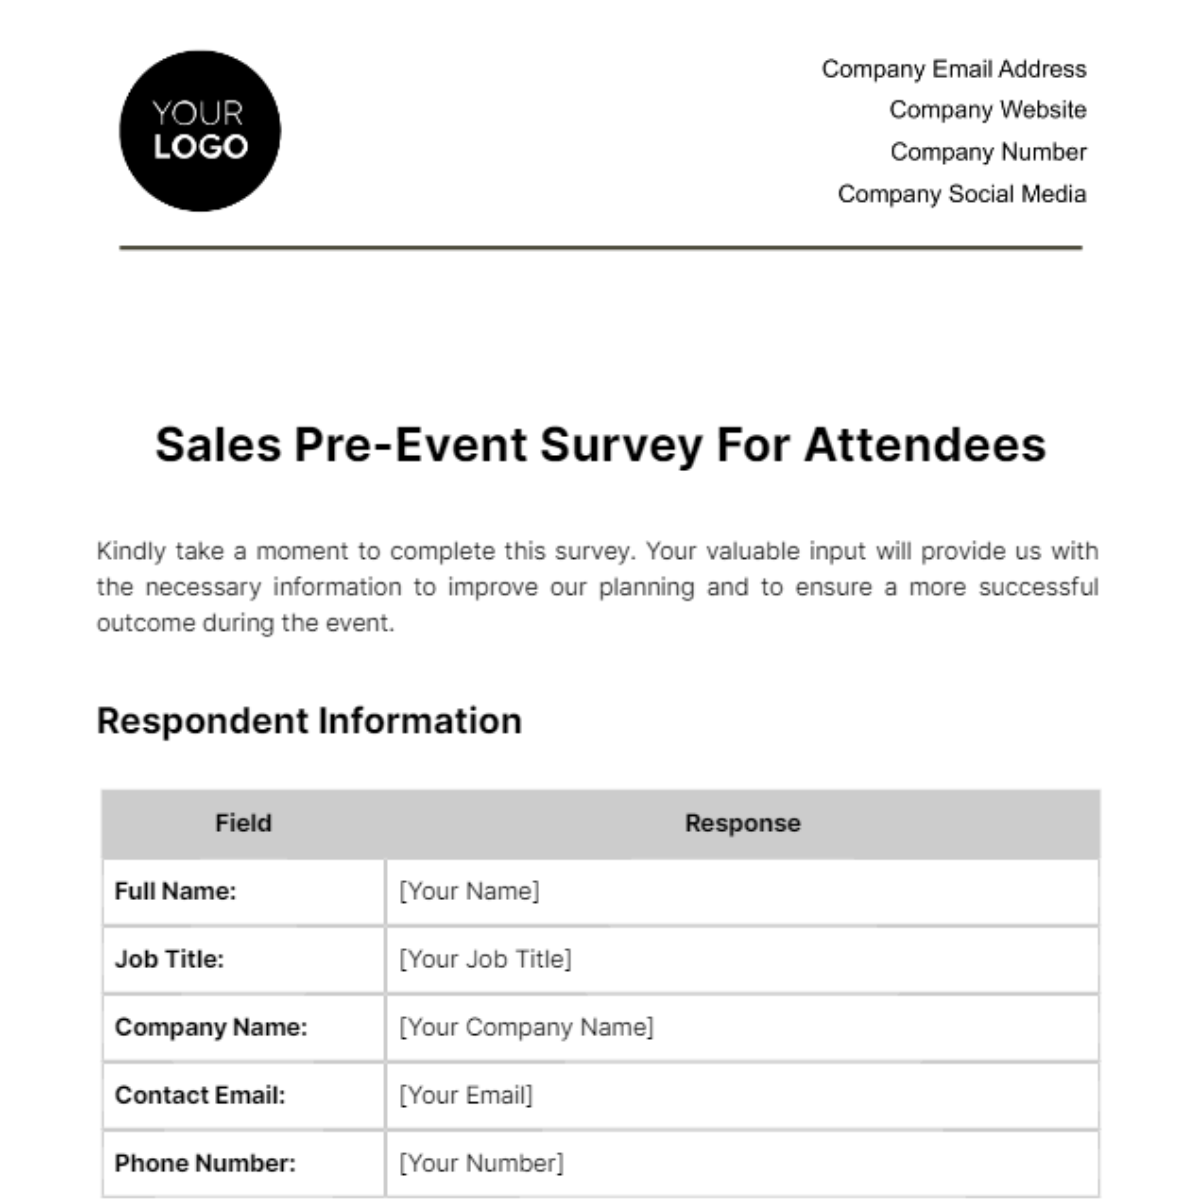 Free Sales Pre-Event Survey for Attendees Template